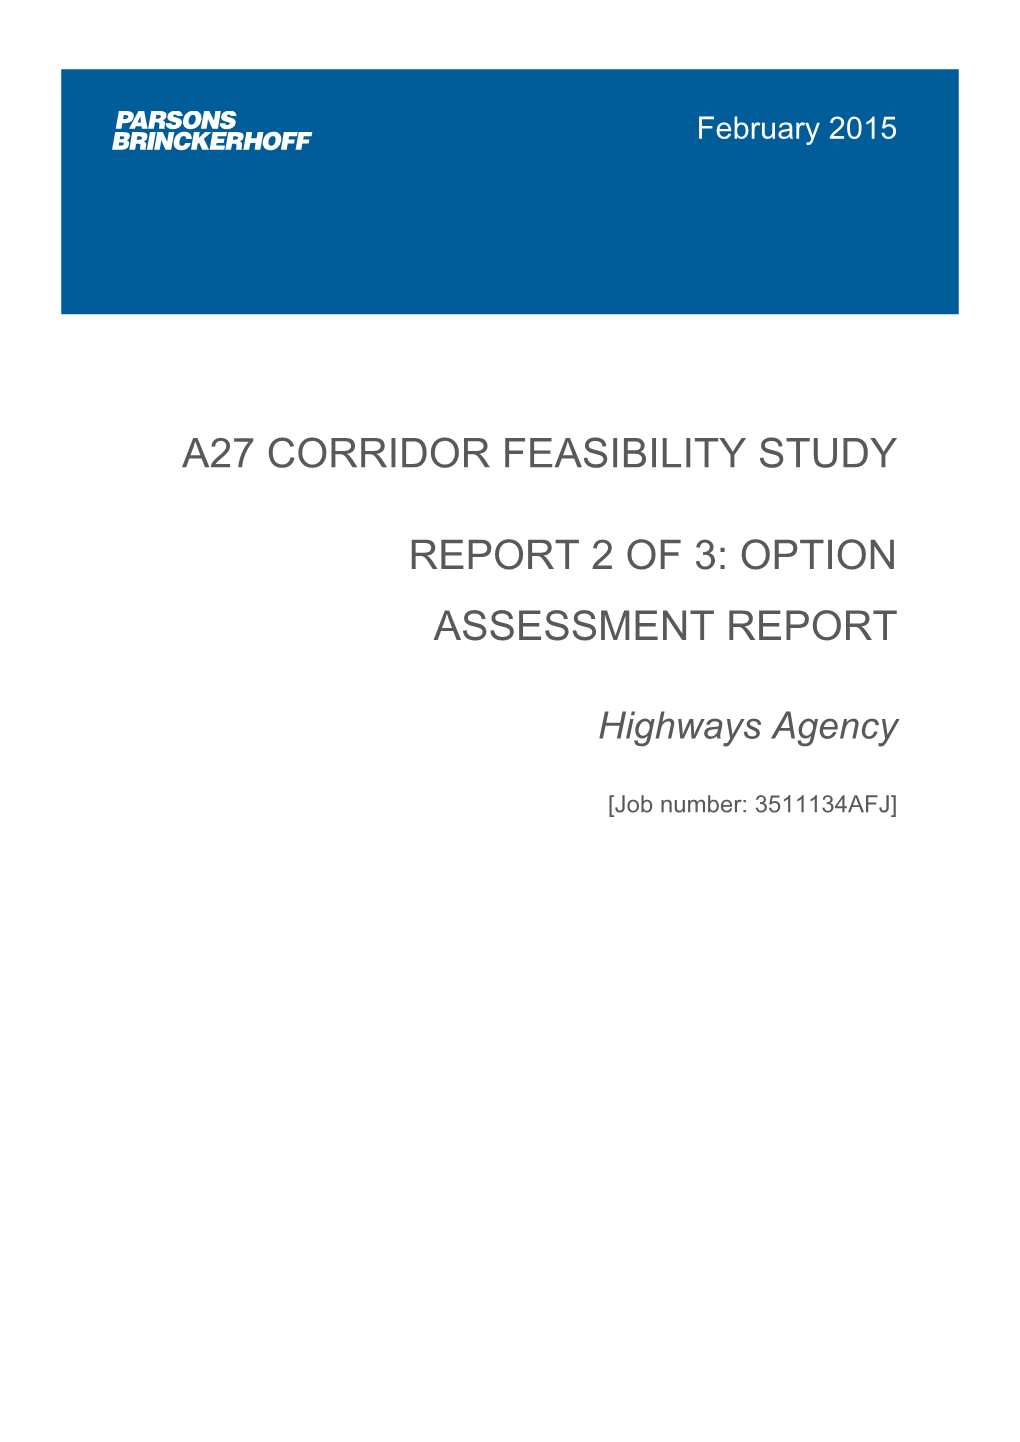 A27 Corridor Feasibility Study Report 2 of 3: Option Assessment Report